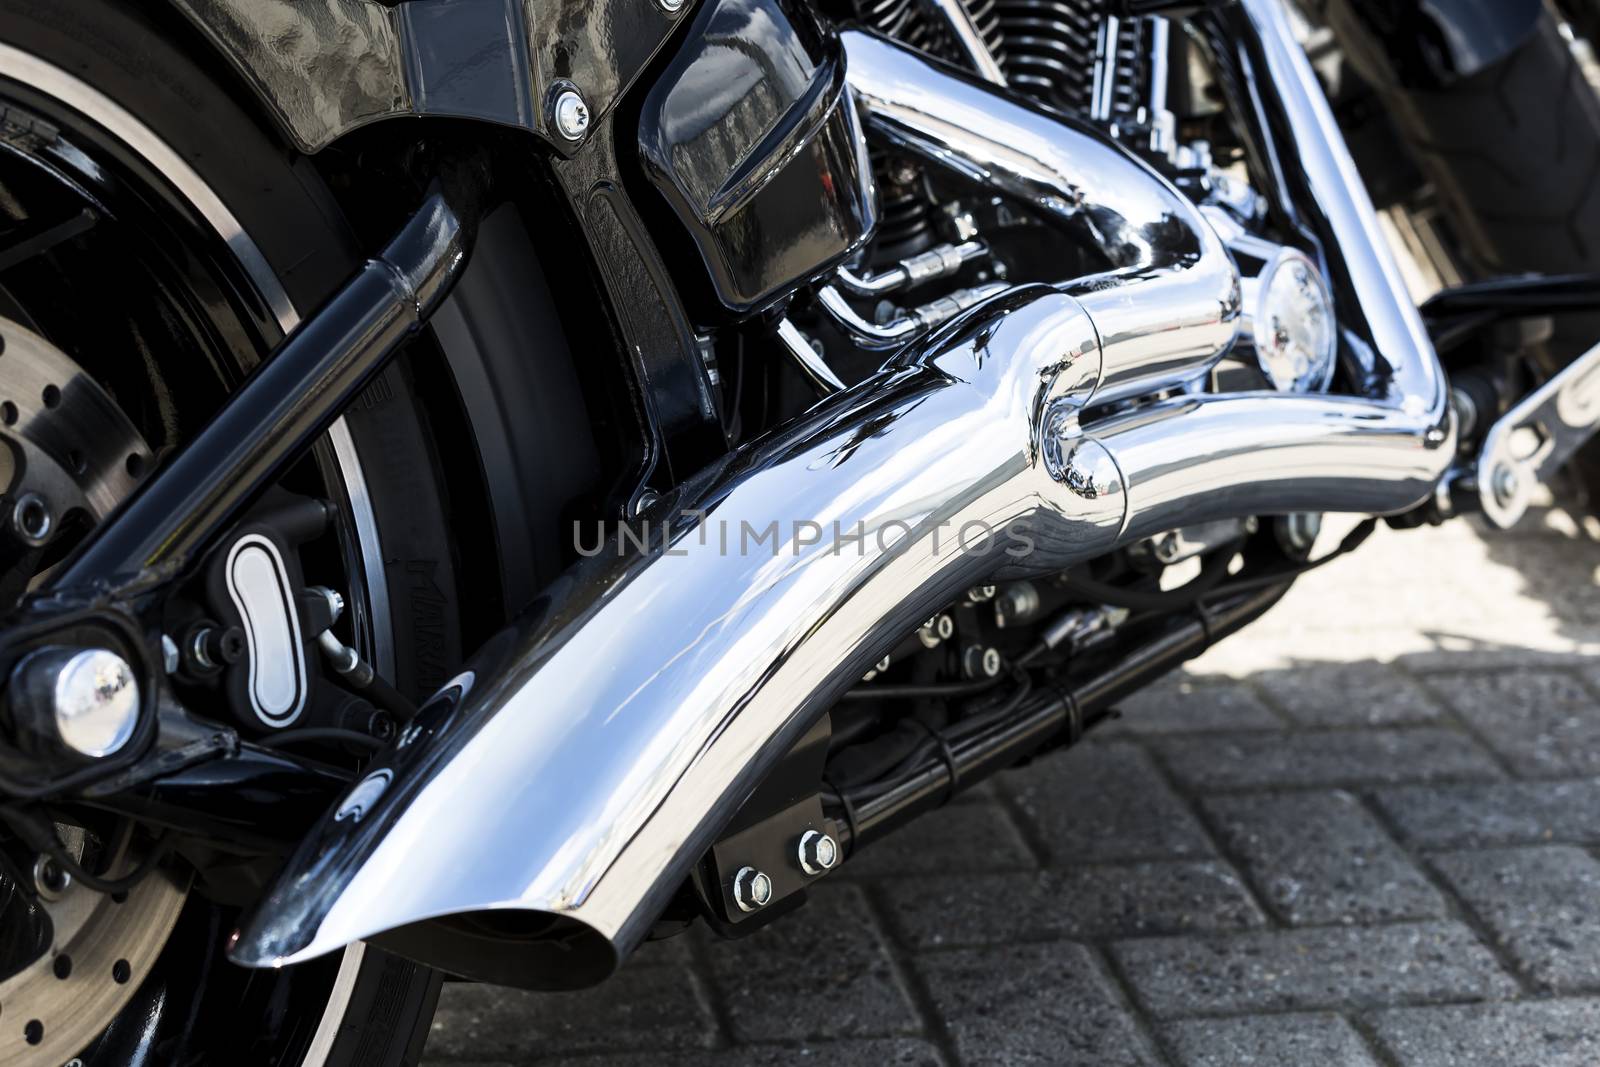 chromium on engine of the motorcycle